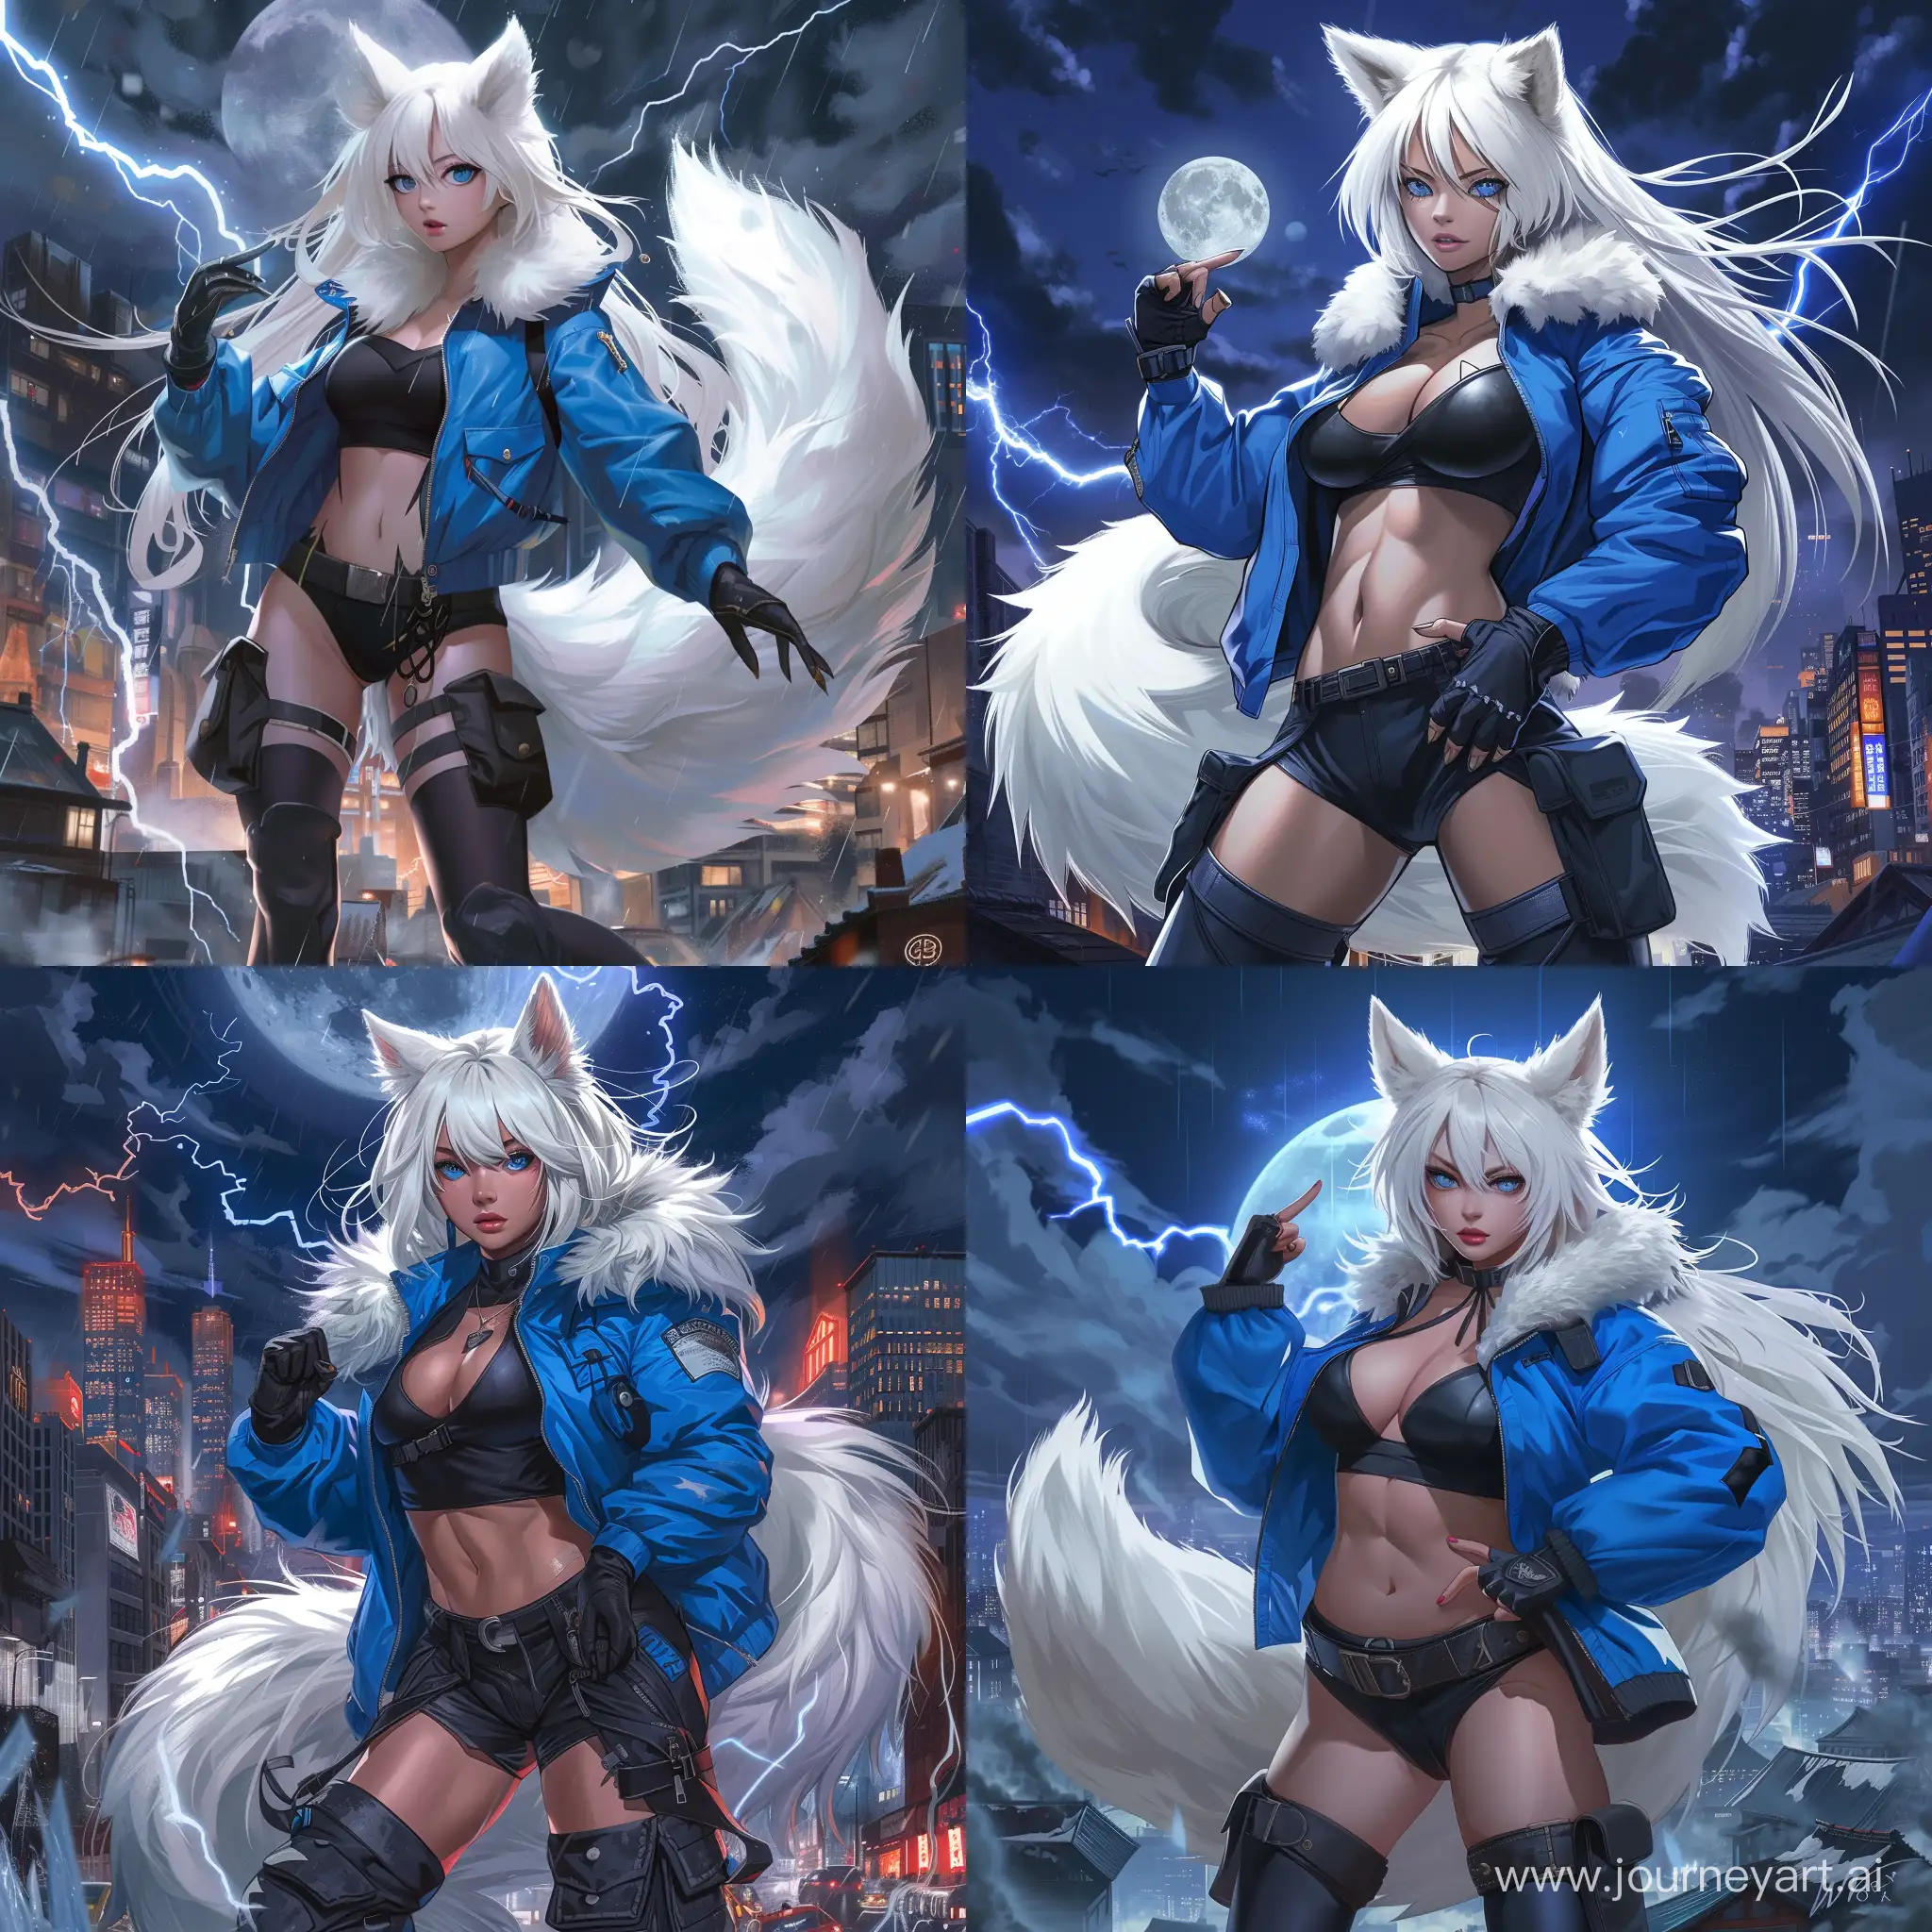 Dynamic-Anime-Style-Asian-Woman-with-White-Fox-Features-in-Night-Cityscape